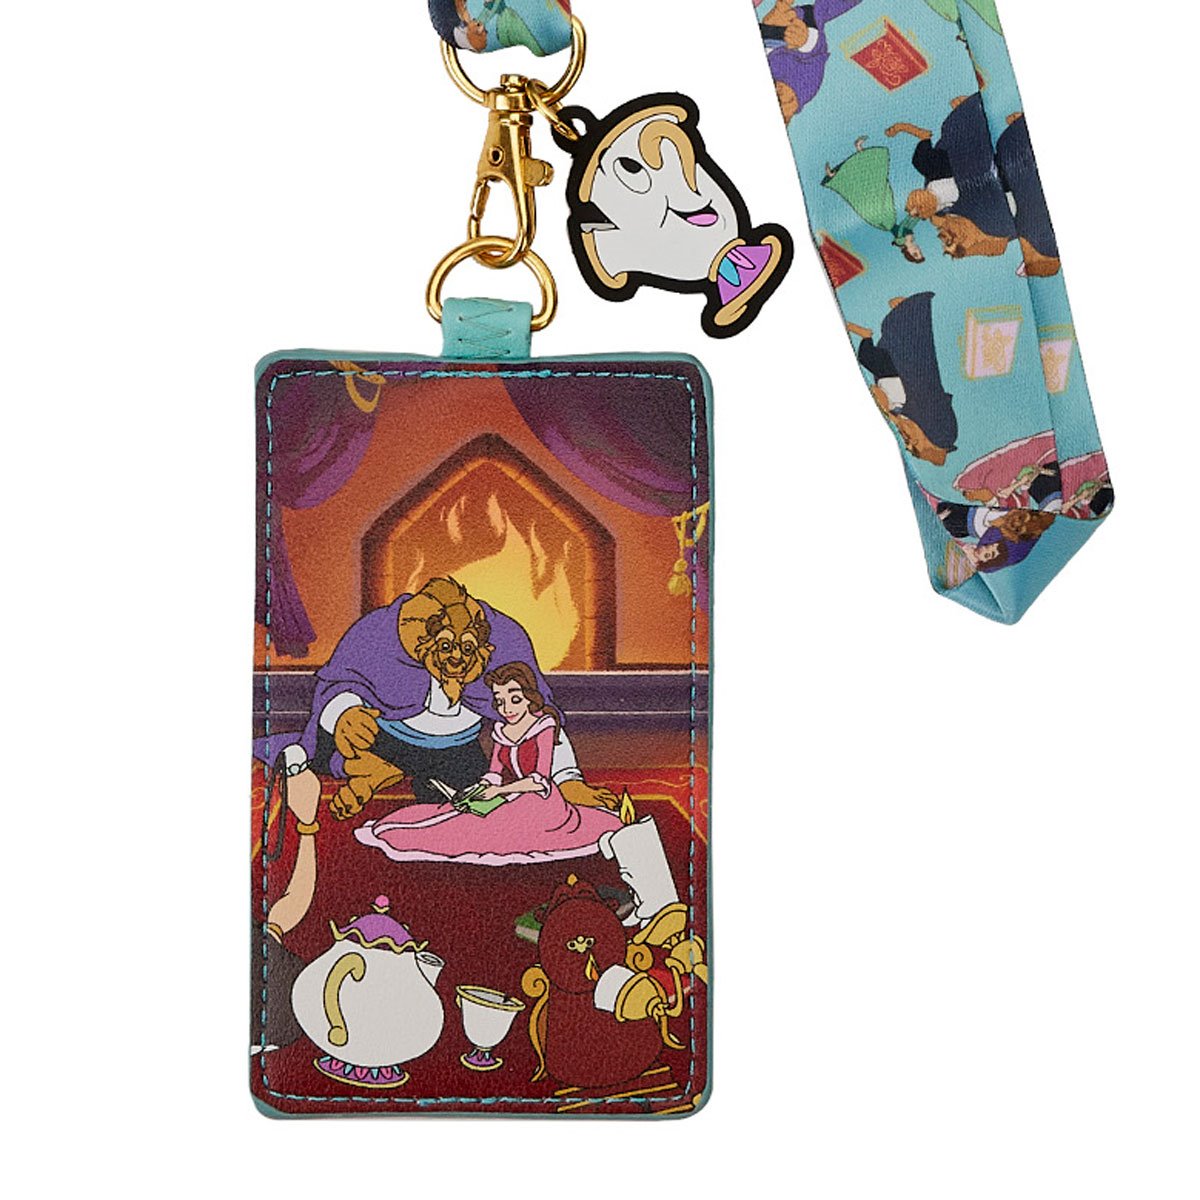 Beauty and the Beast Fireplace Scene Zip-Around Wallet